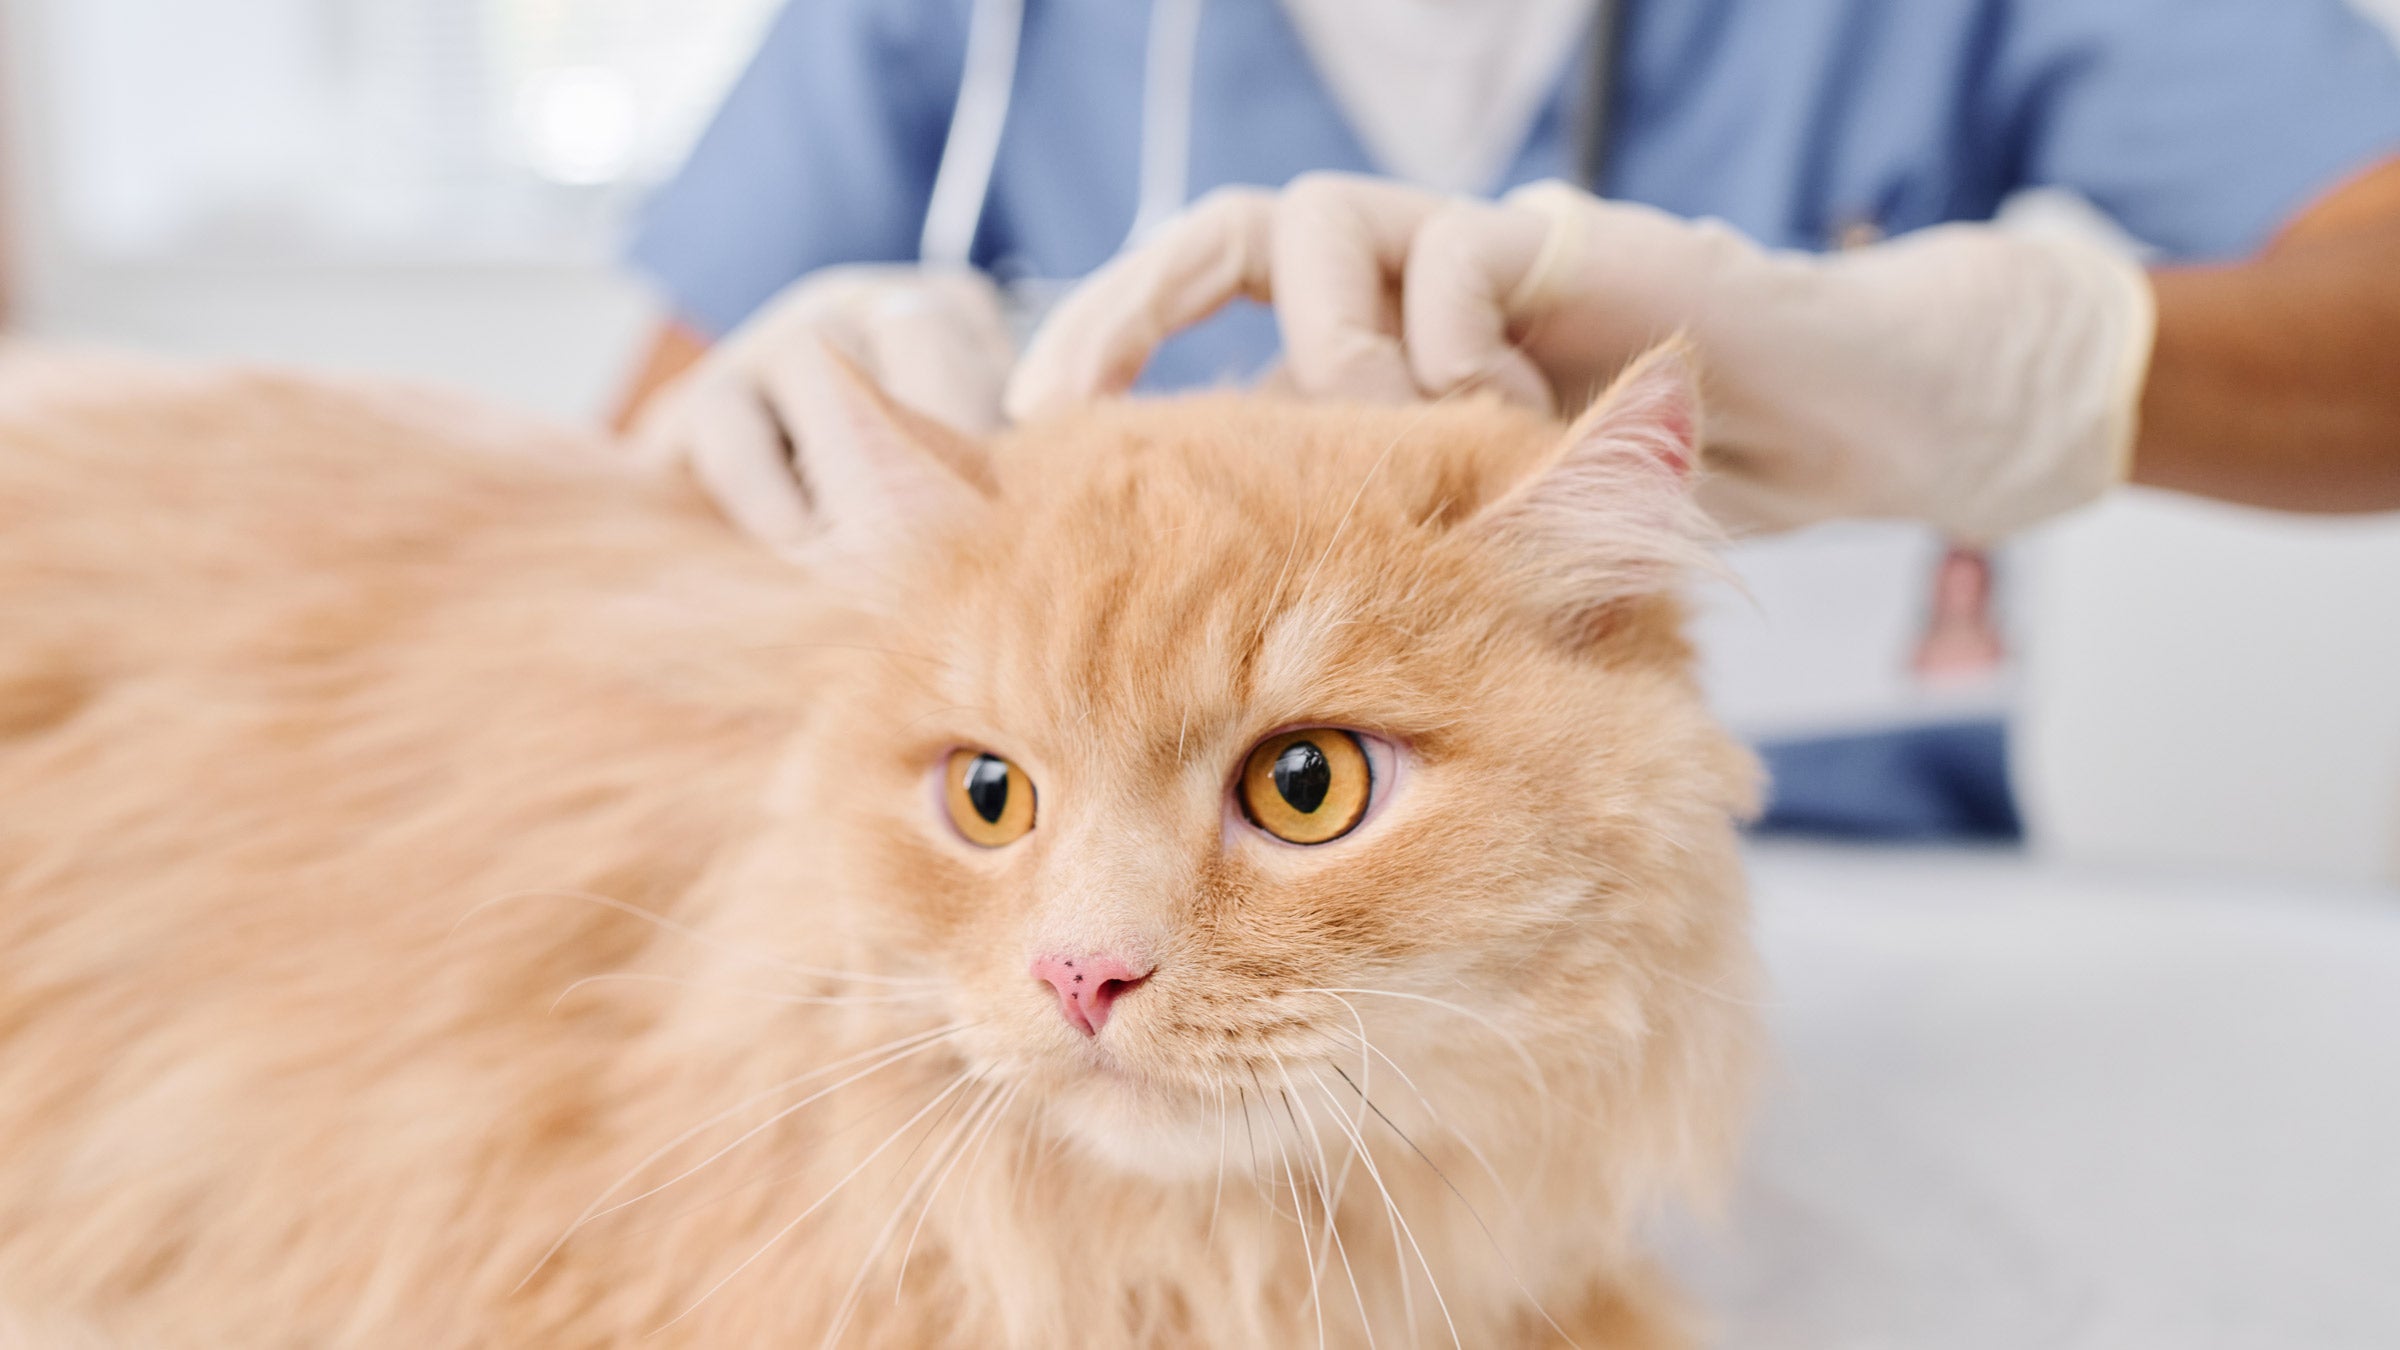 What Is Ringworm in Cats, & How Do You Treat It? - GoodRx